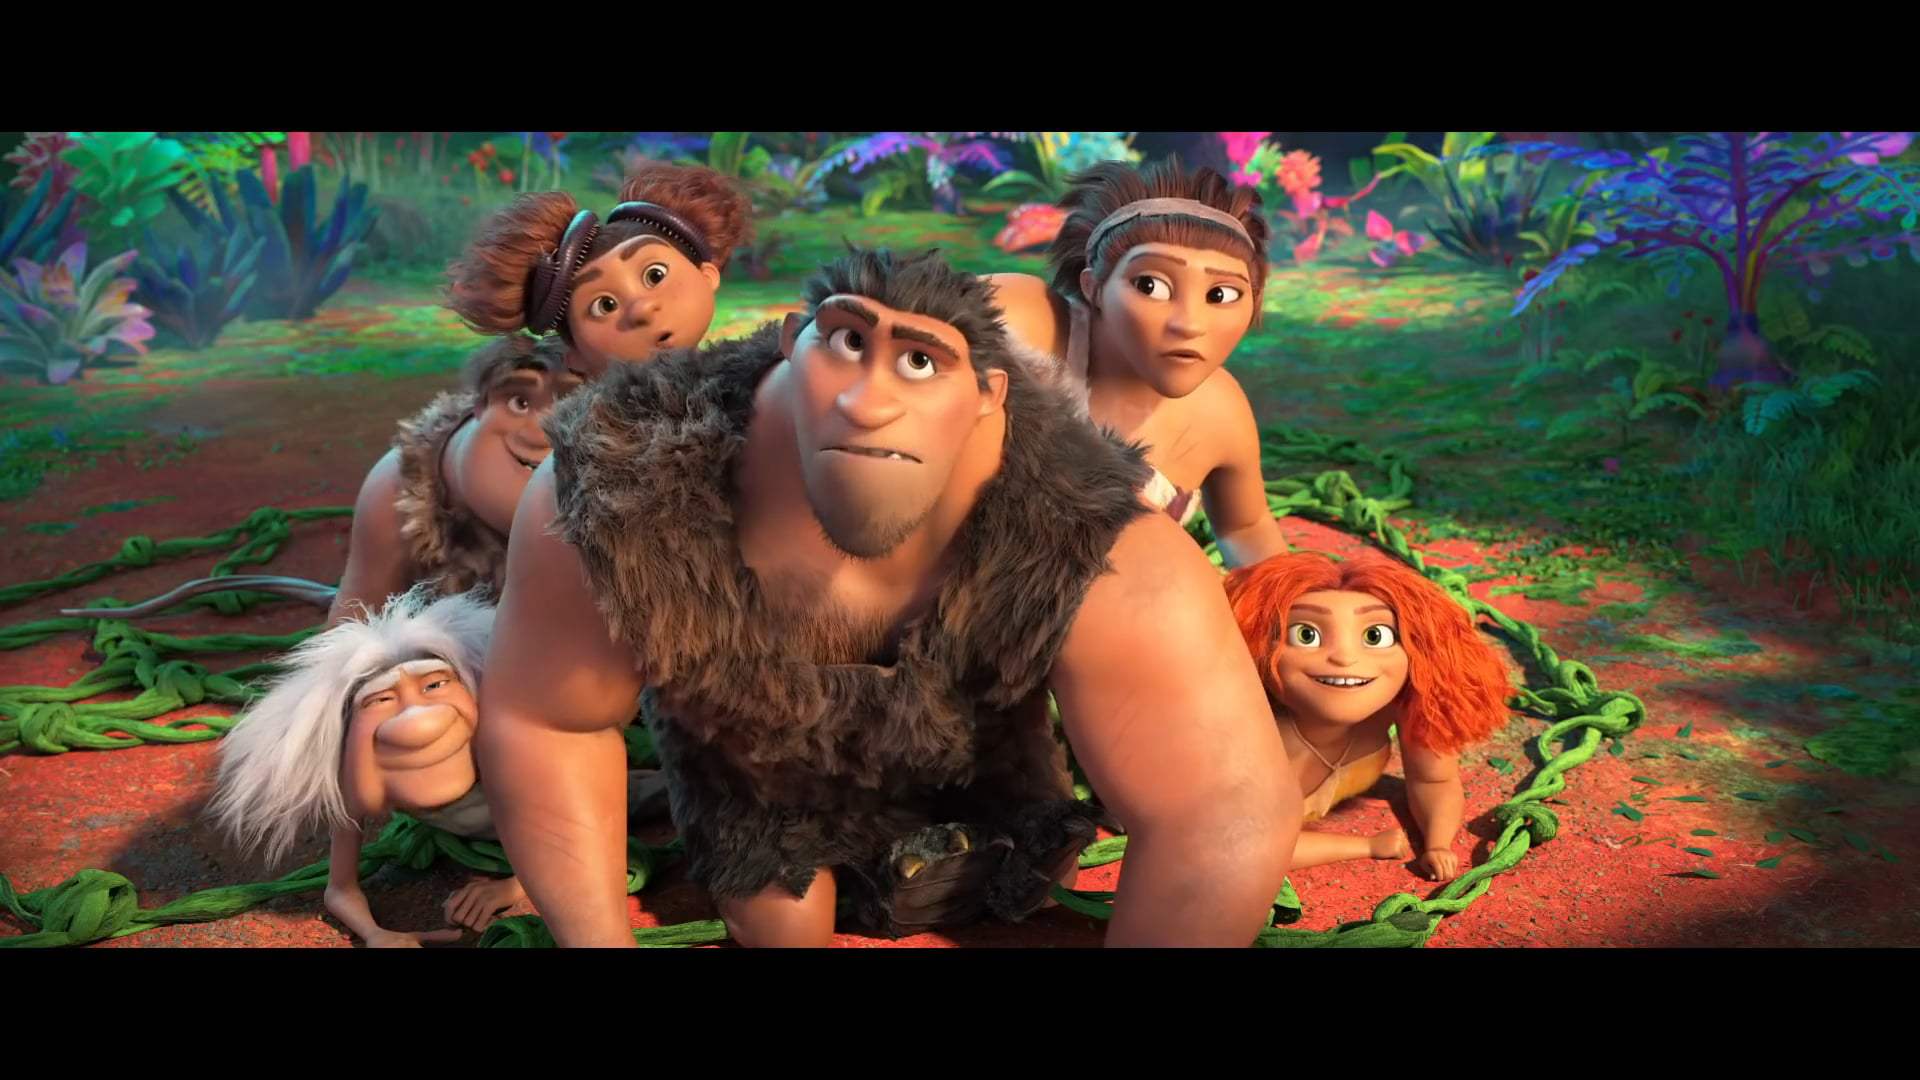 The Croods: A New Age (2020)